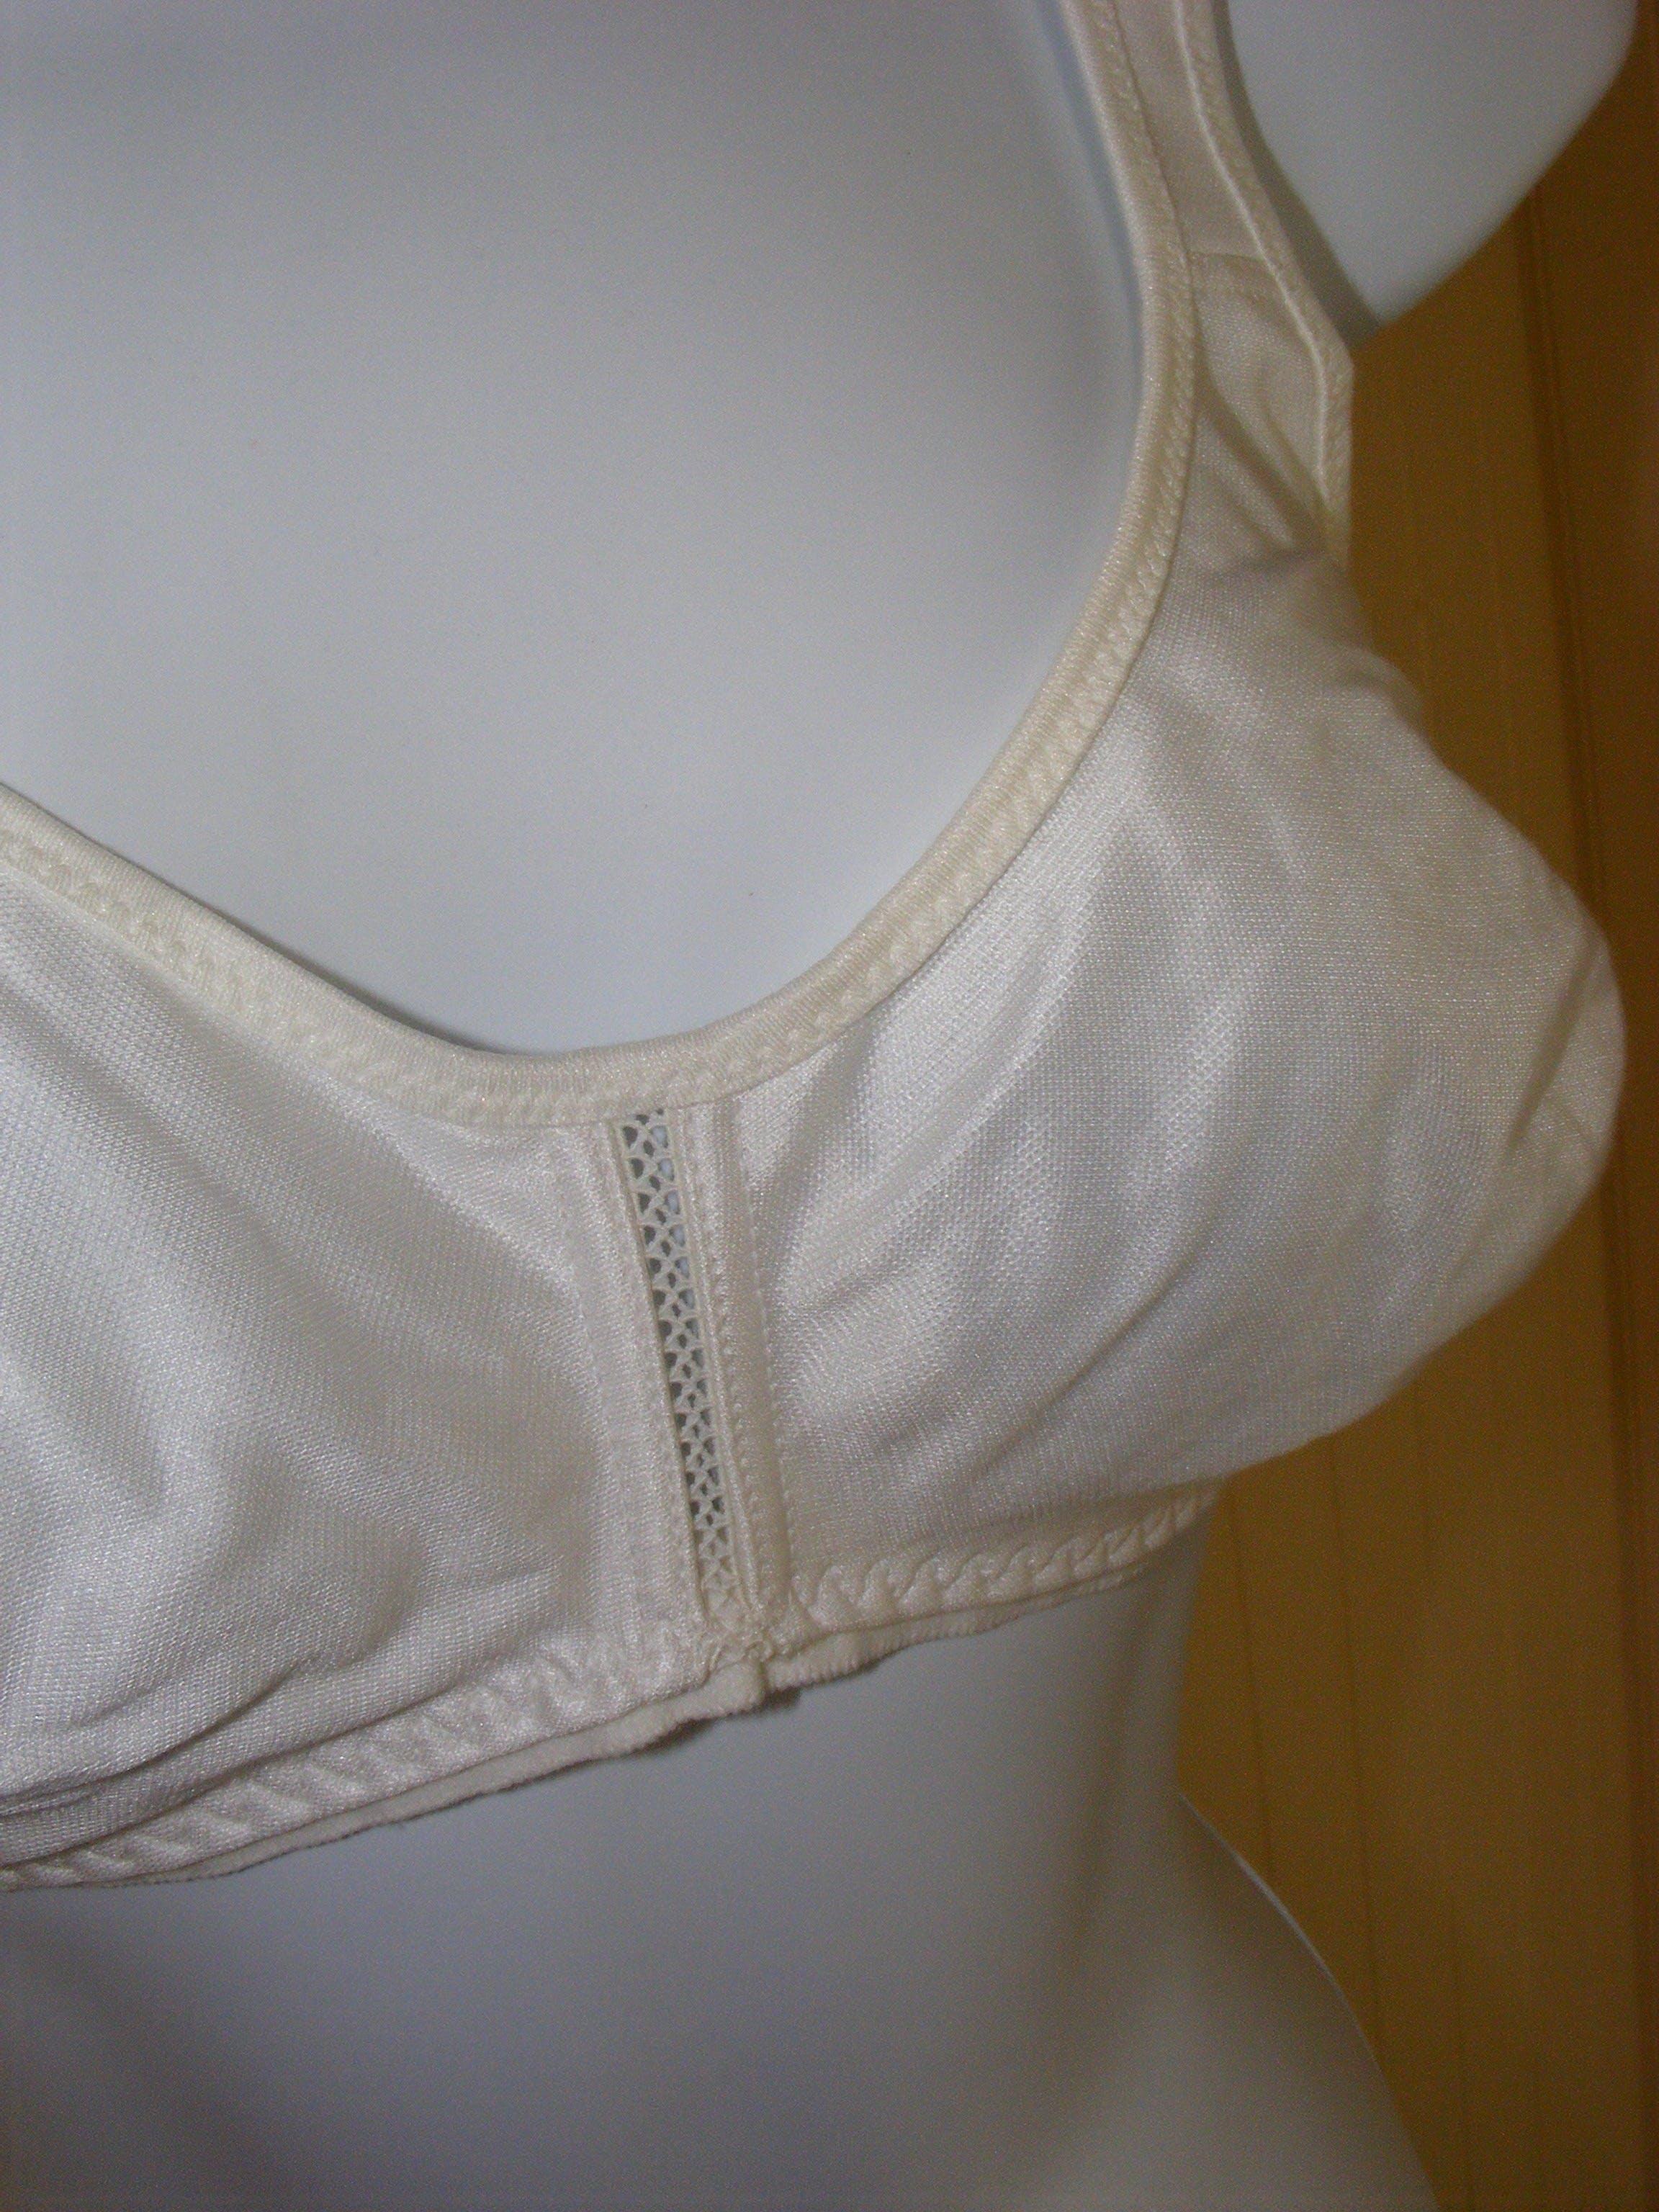 http://shopthrilling.com/cdn/shop/products/80-s-bra-38-a-white-soft-cup-deadstock-by-sears-by-sears-product-image__FkmAhW.jpg?v=1641145842